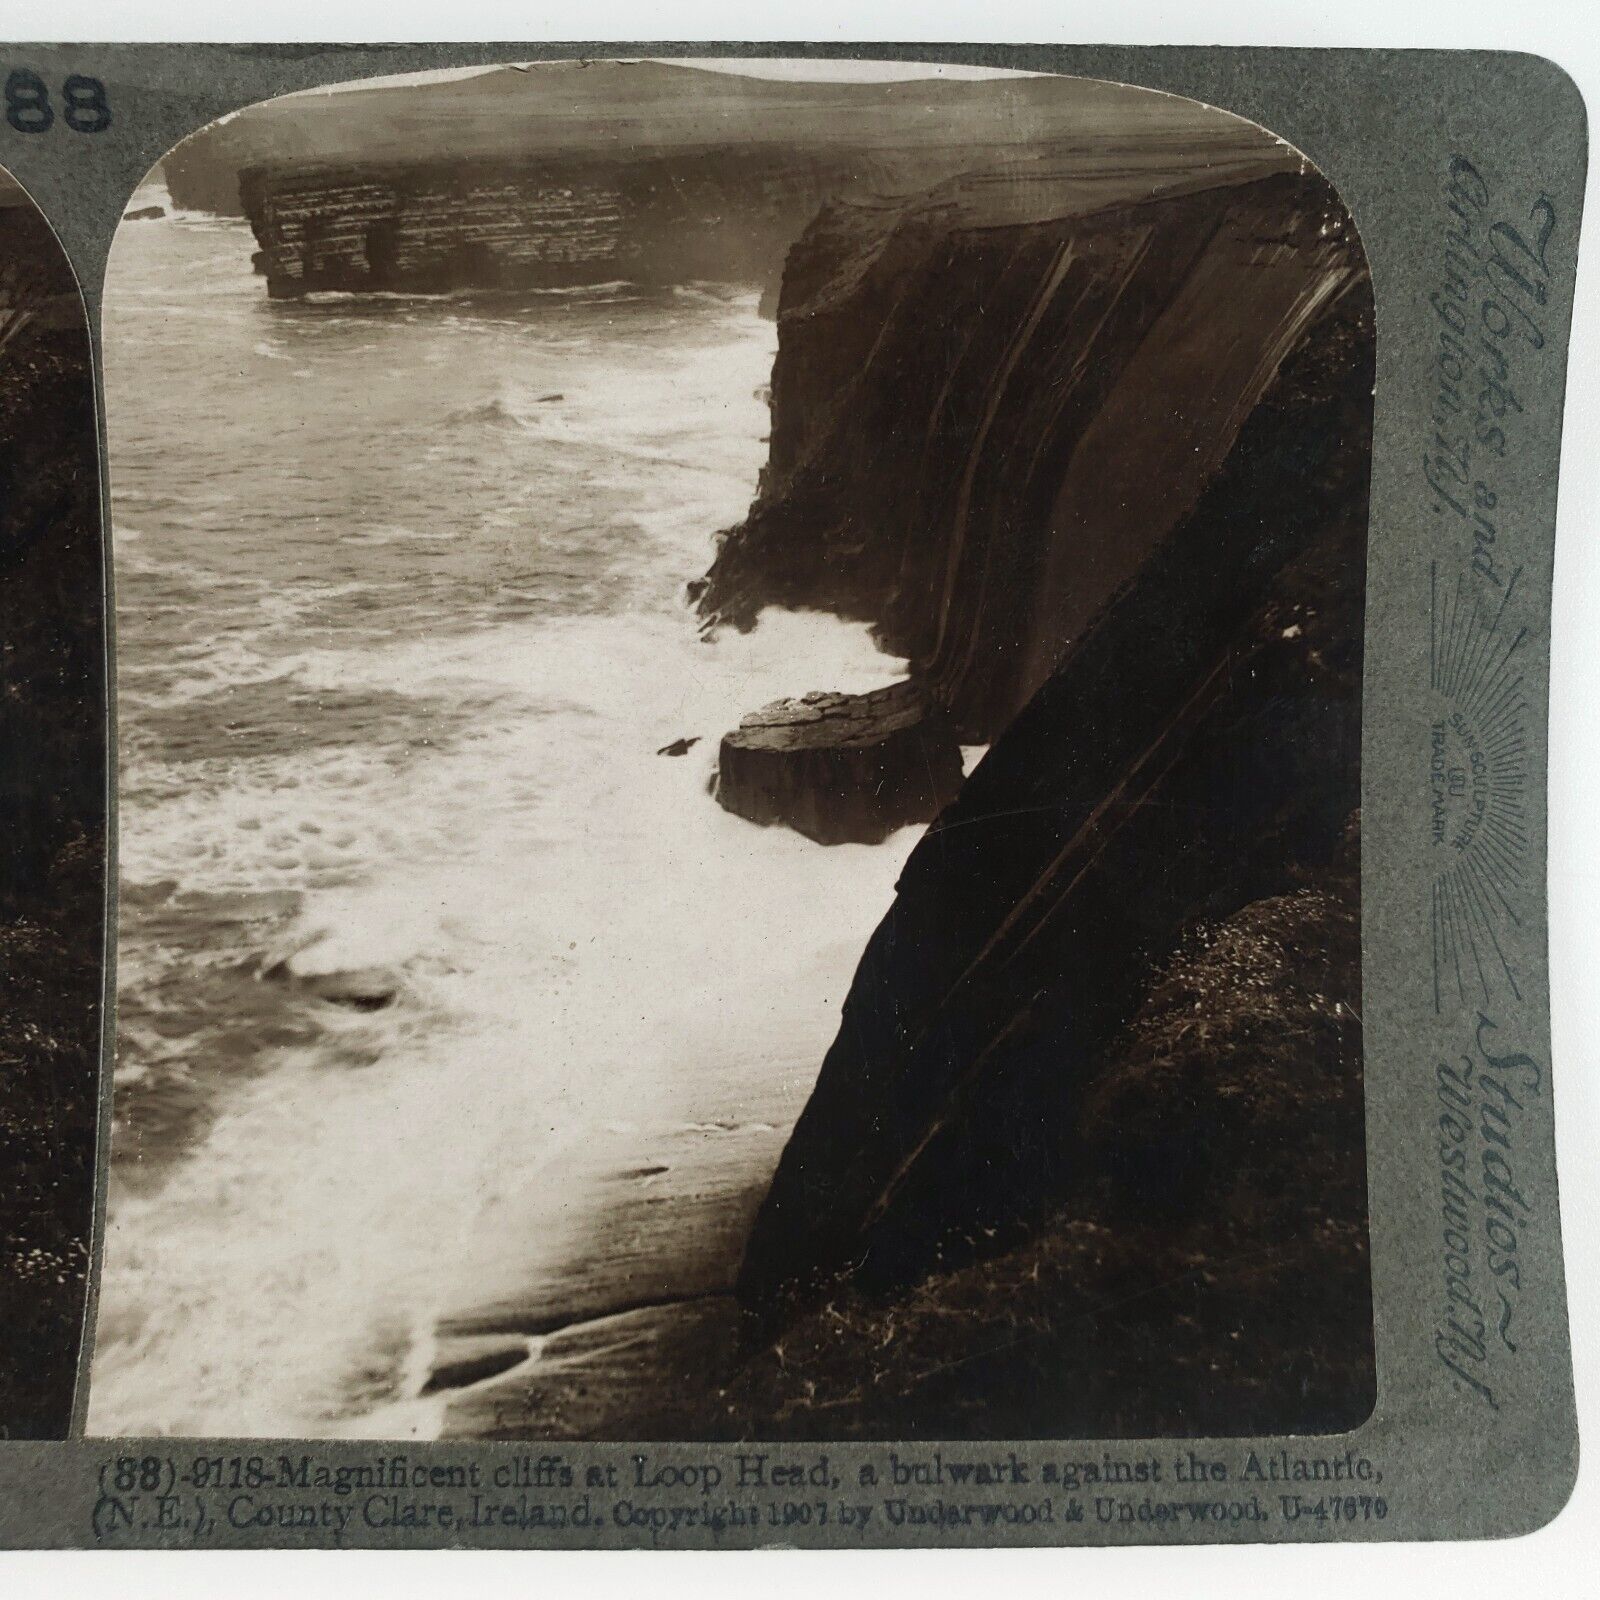 Loop Head Cliffs Ireland Stereoview c1907 River Shannon County Clare Photo B2113